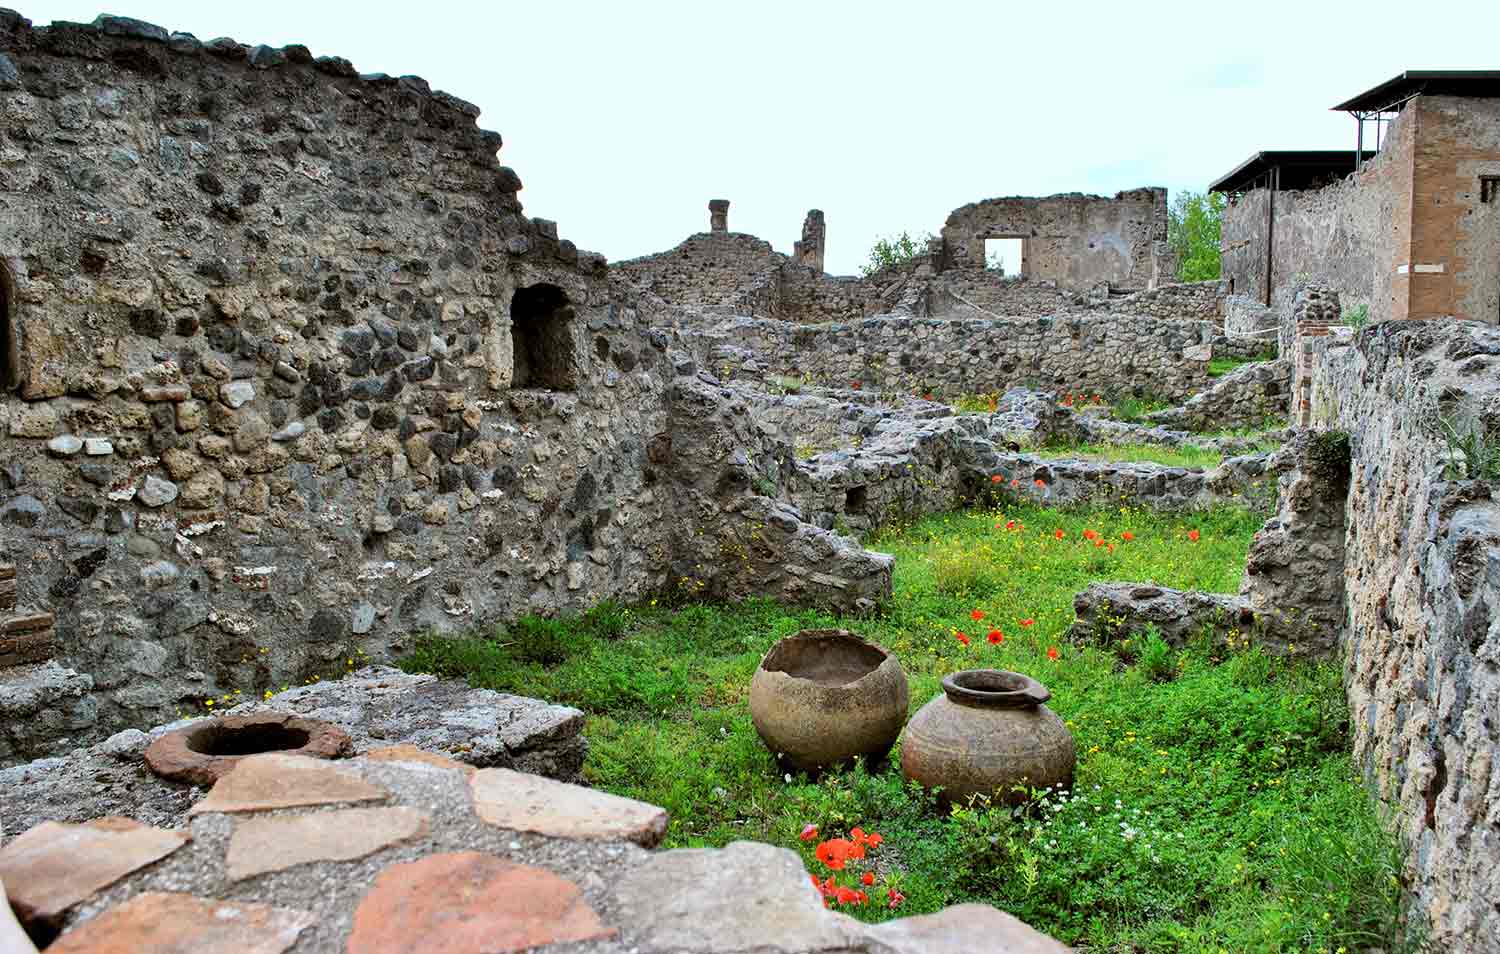 Grass and flowers grow among ruins of buildings and pottery.